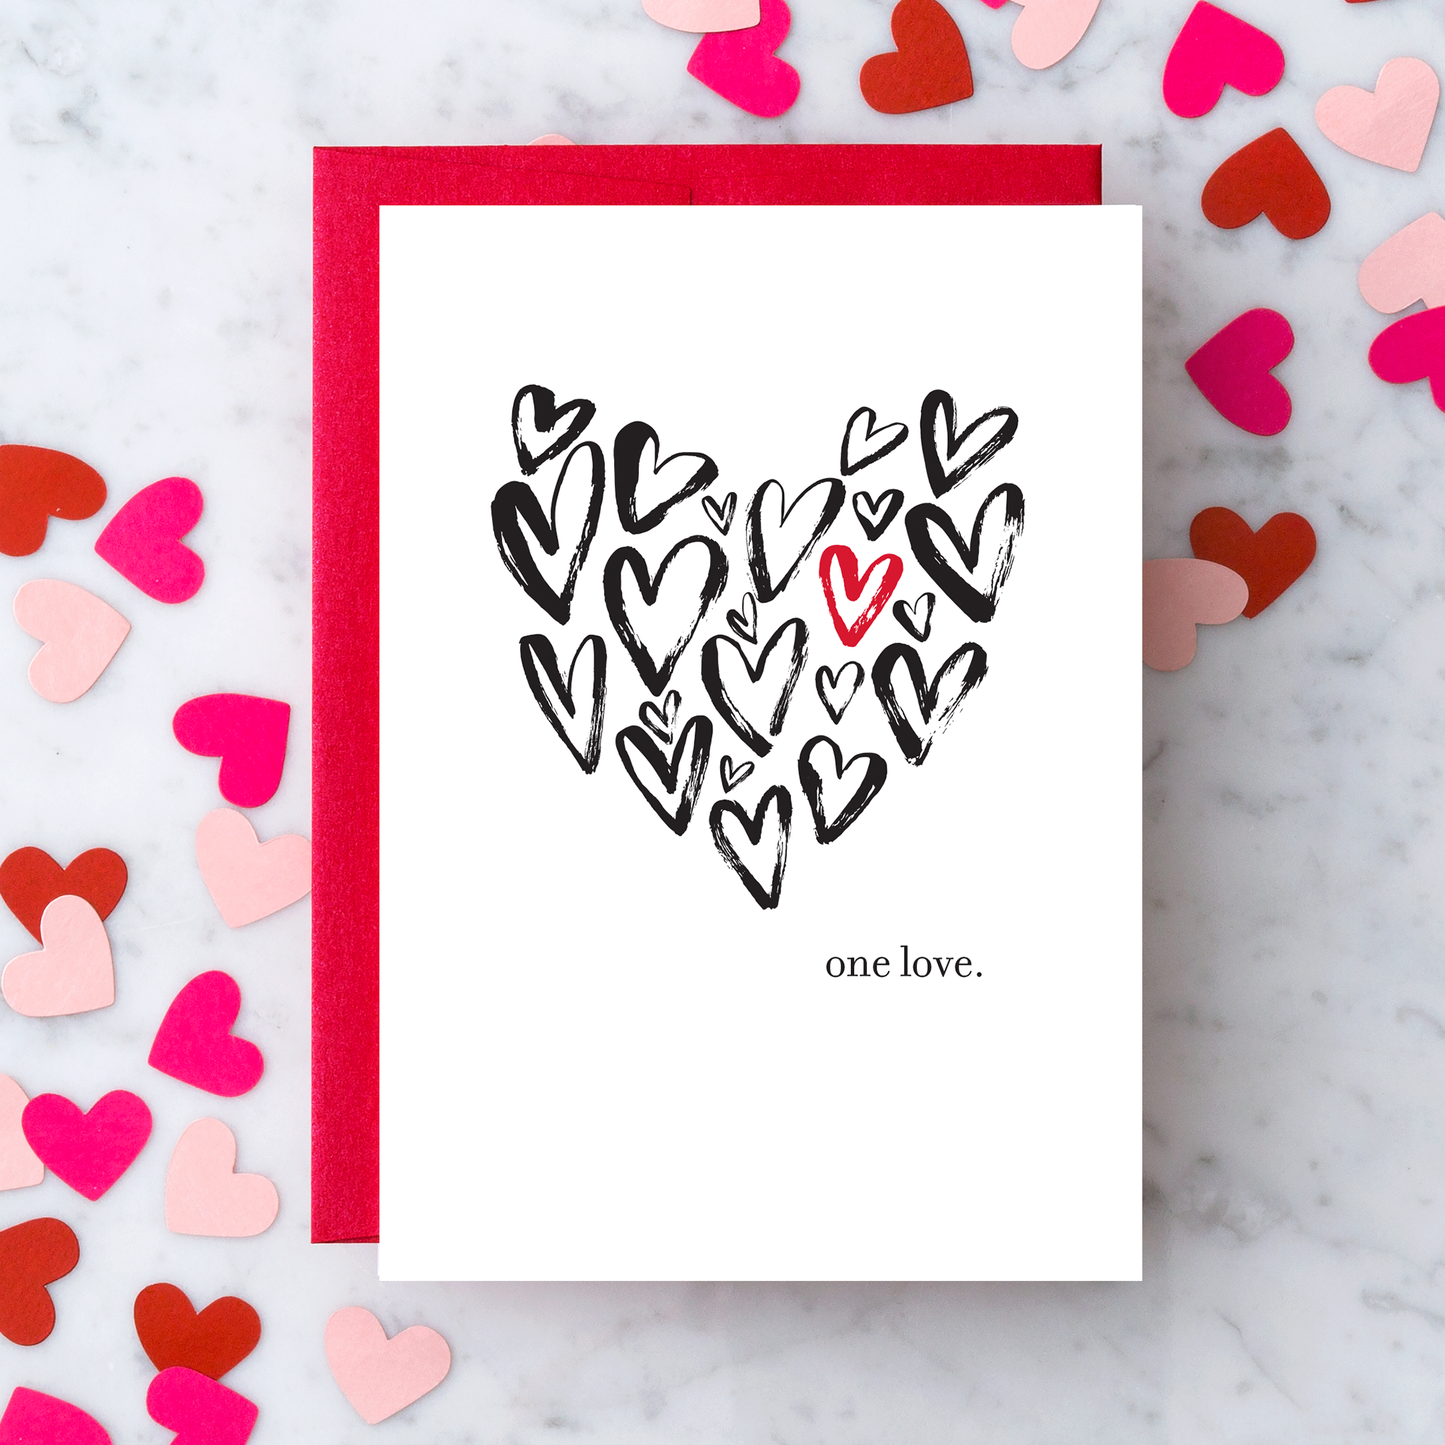 Cards: "One Love" Greeting Card